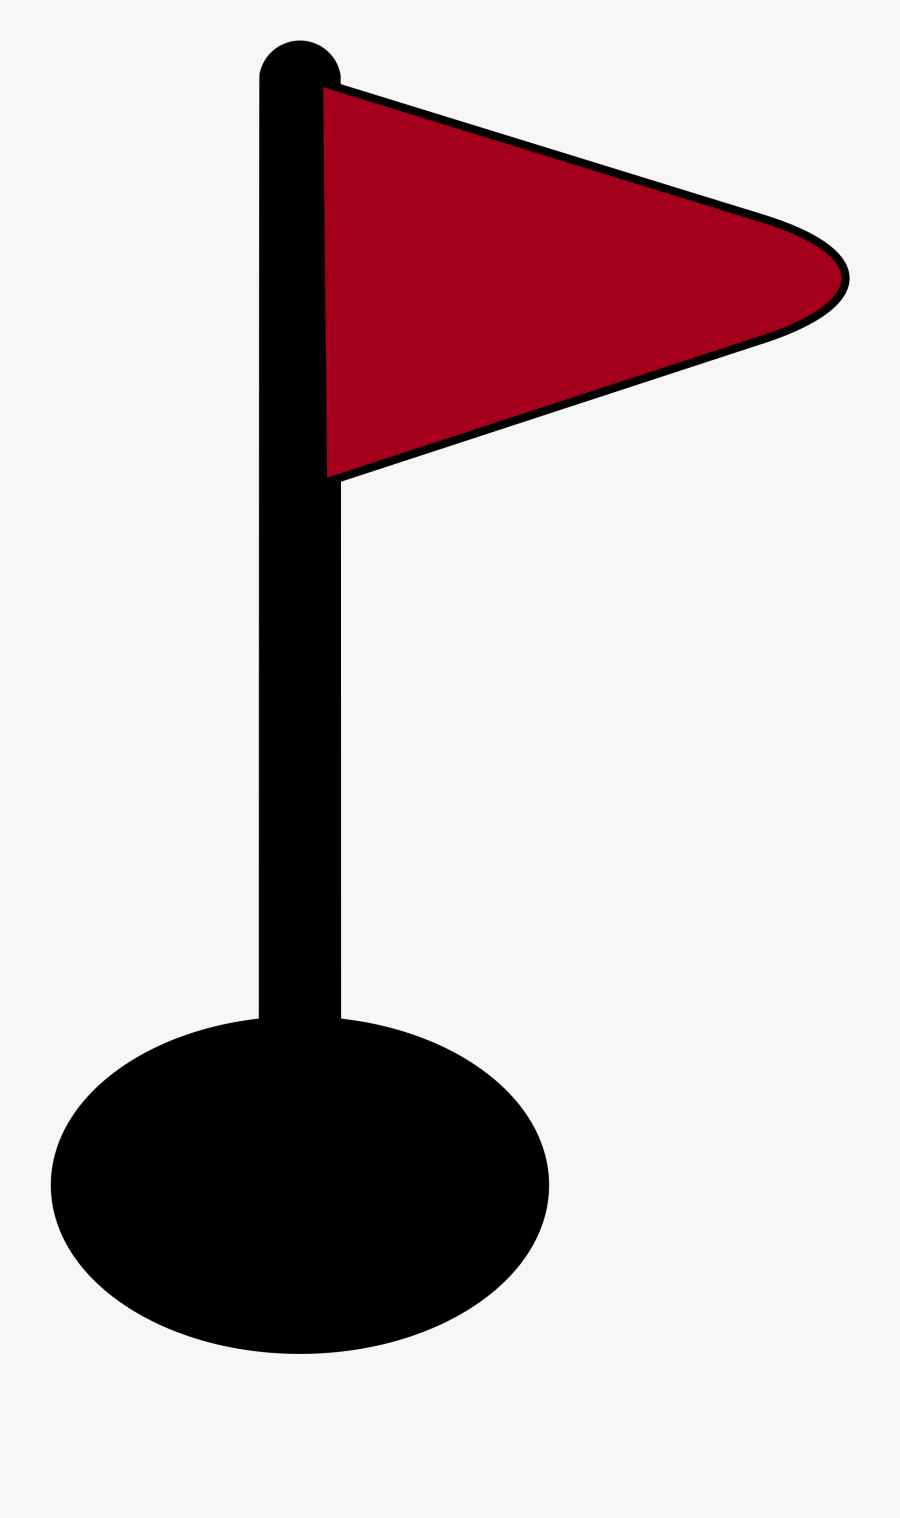 Transparent Golf Tee Clipart - Red Golf Flag Icon, Transparent Clipart